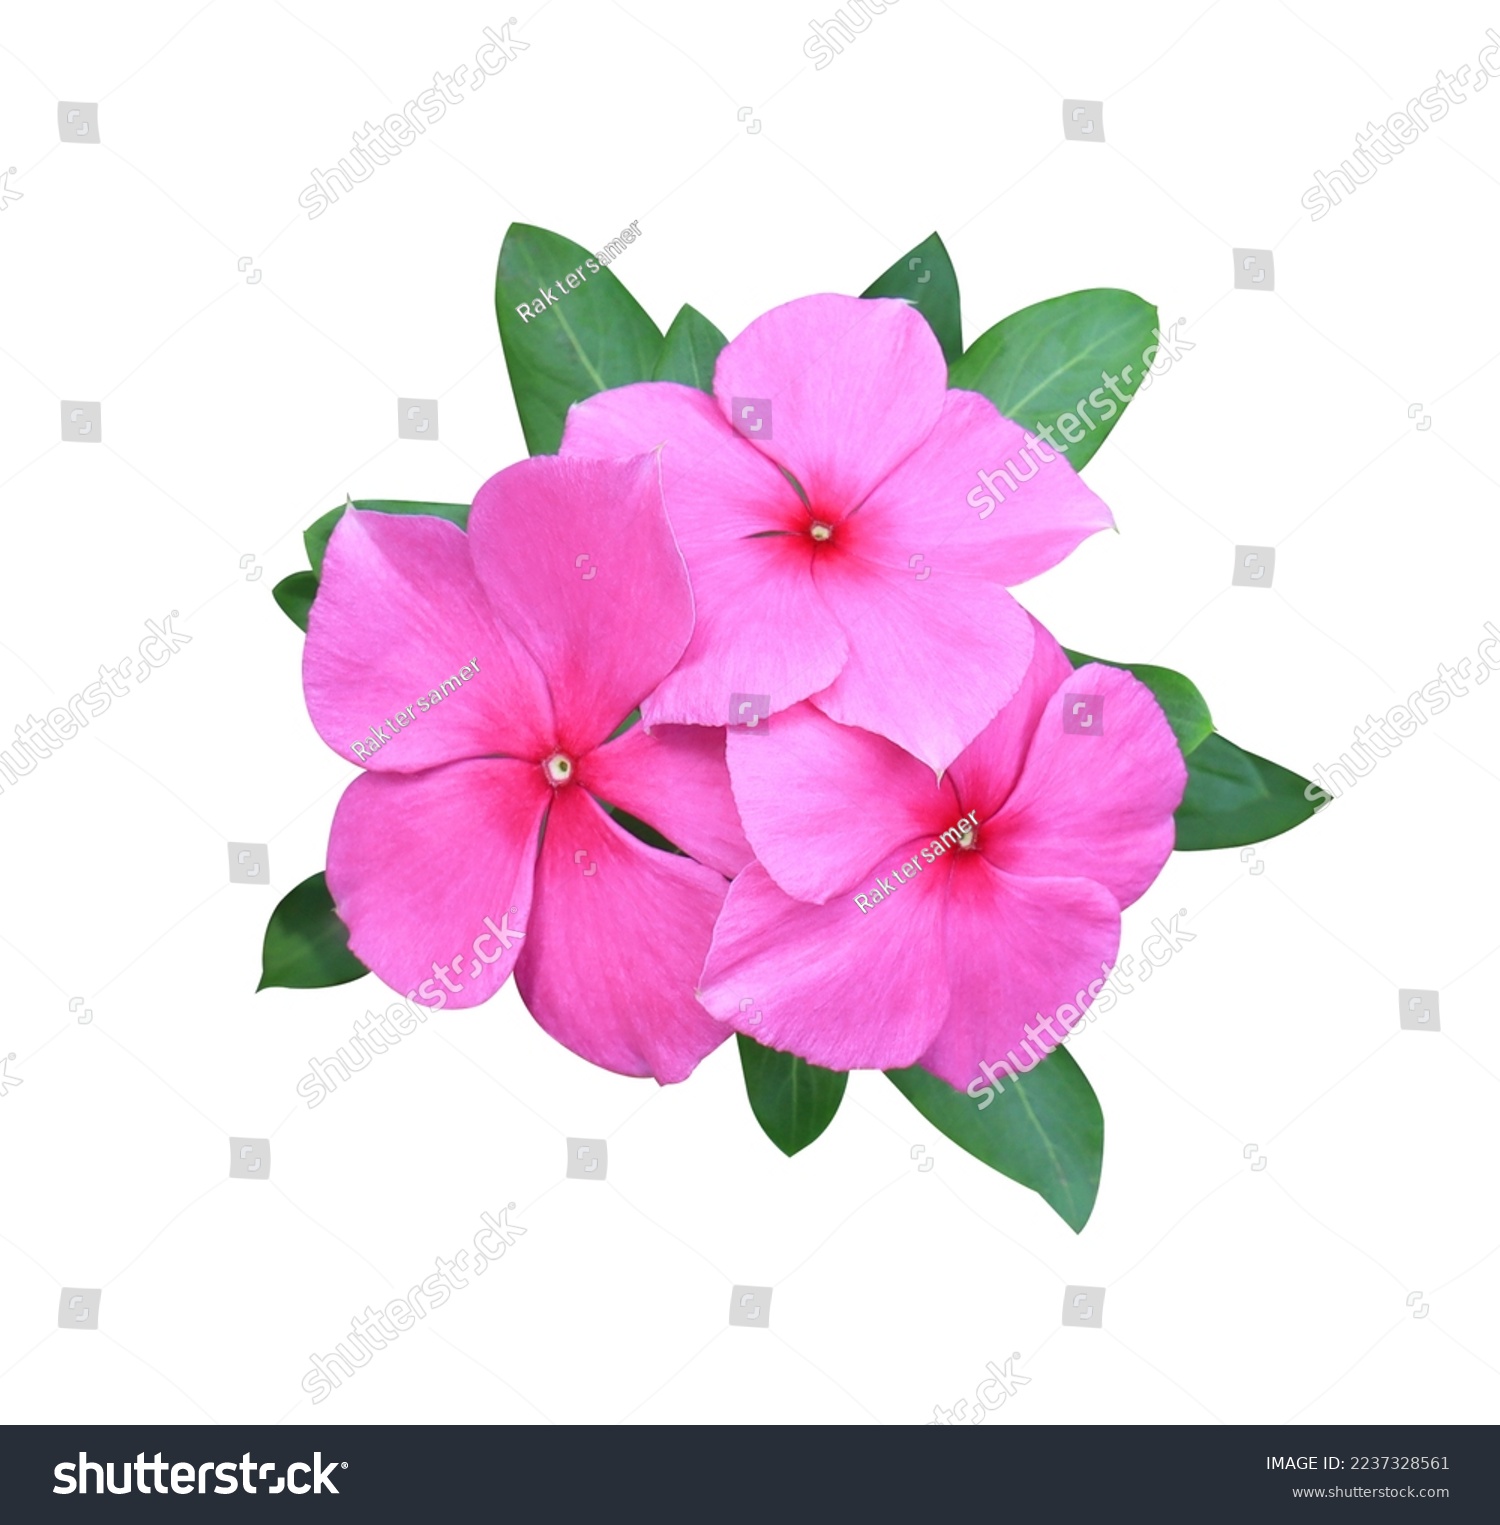 Madagascar periwinkle, Vinca,Old maid, Cayenne jasmine, Rose periwinkle flowers. Close up pink flower bouquet on green leaf isolated on white background. #2237328561